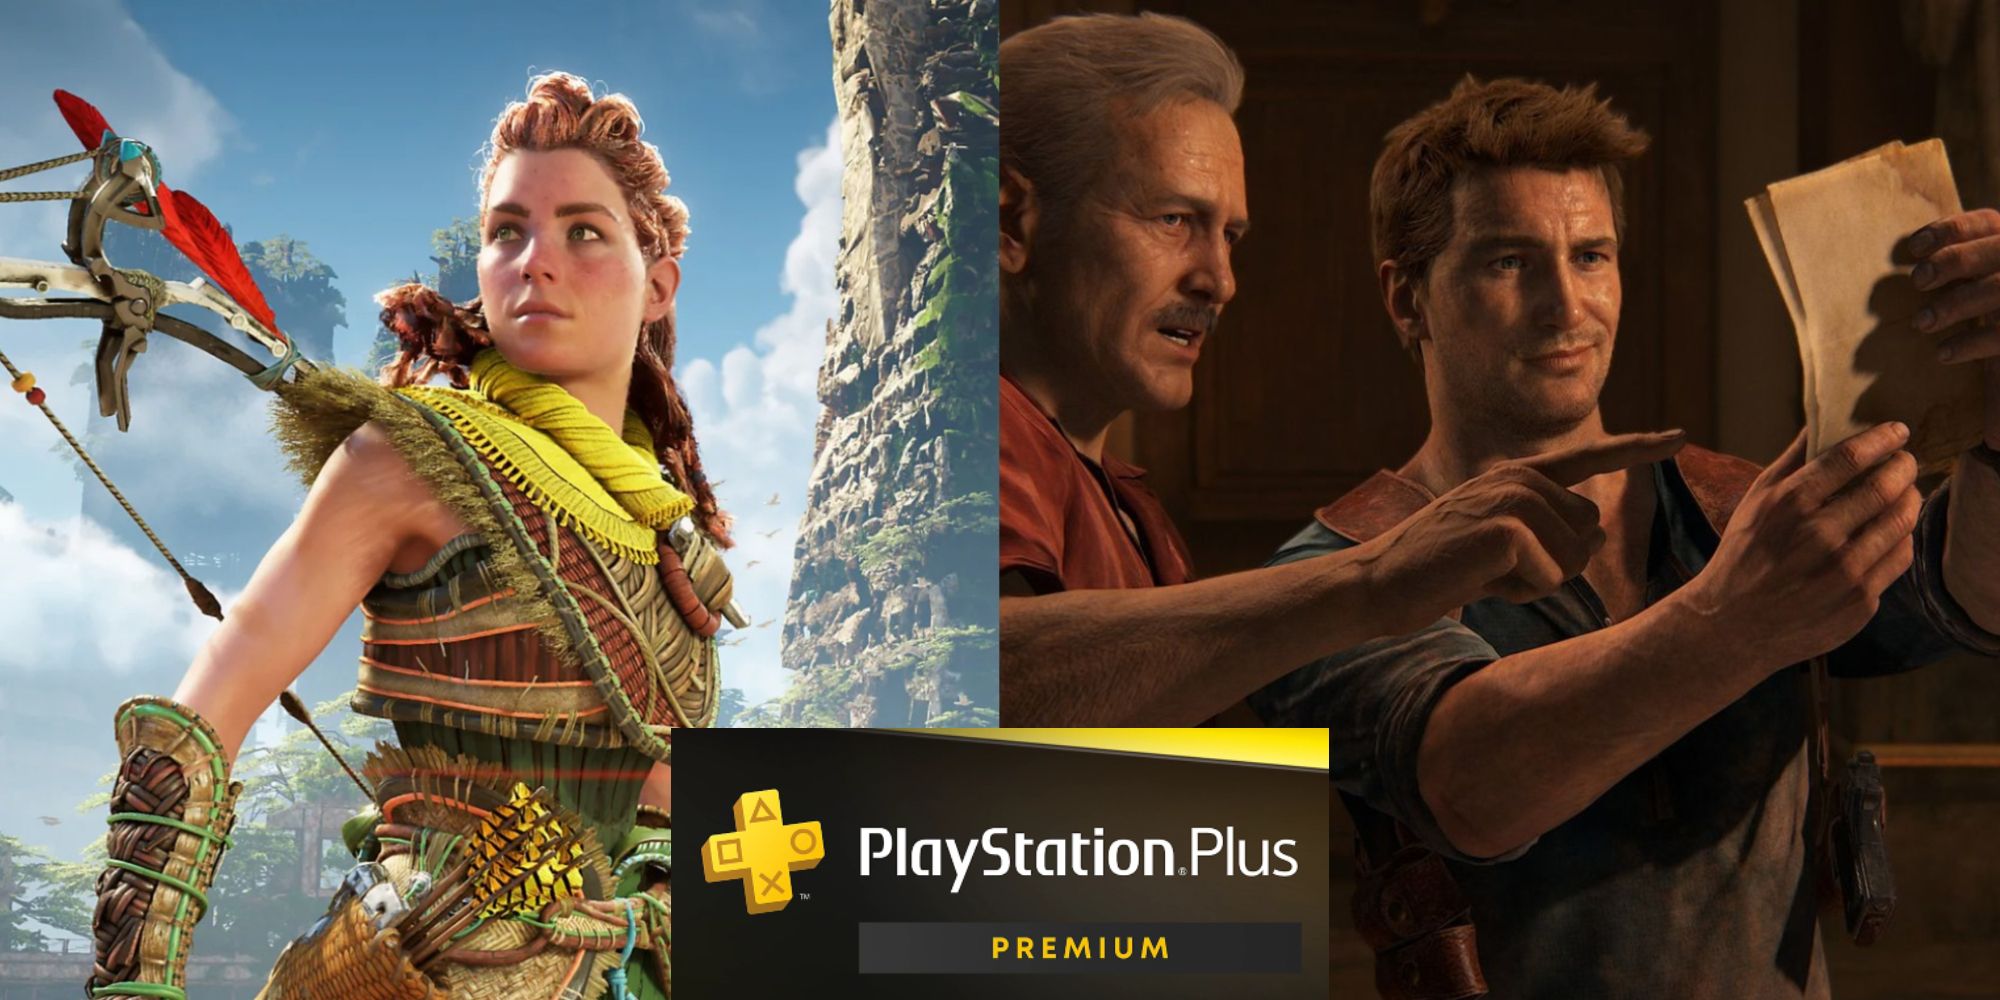 PlayStation Plus Featured Split Image Of Horizon and Uncharted With PlayStation Plus Logo In Middle